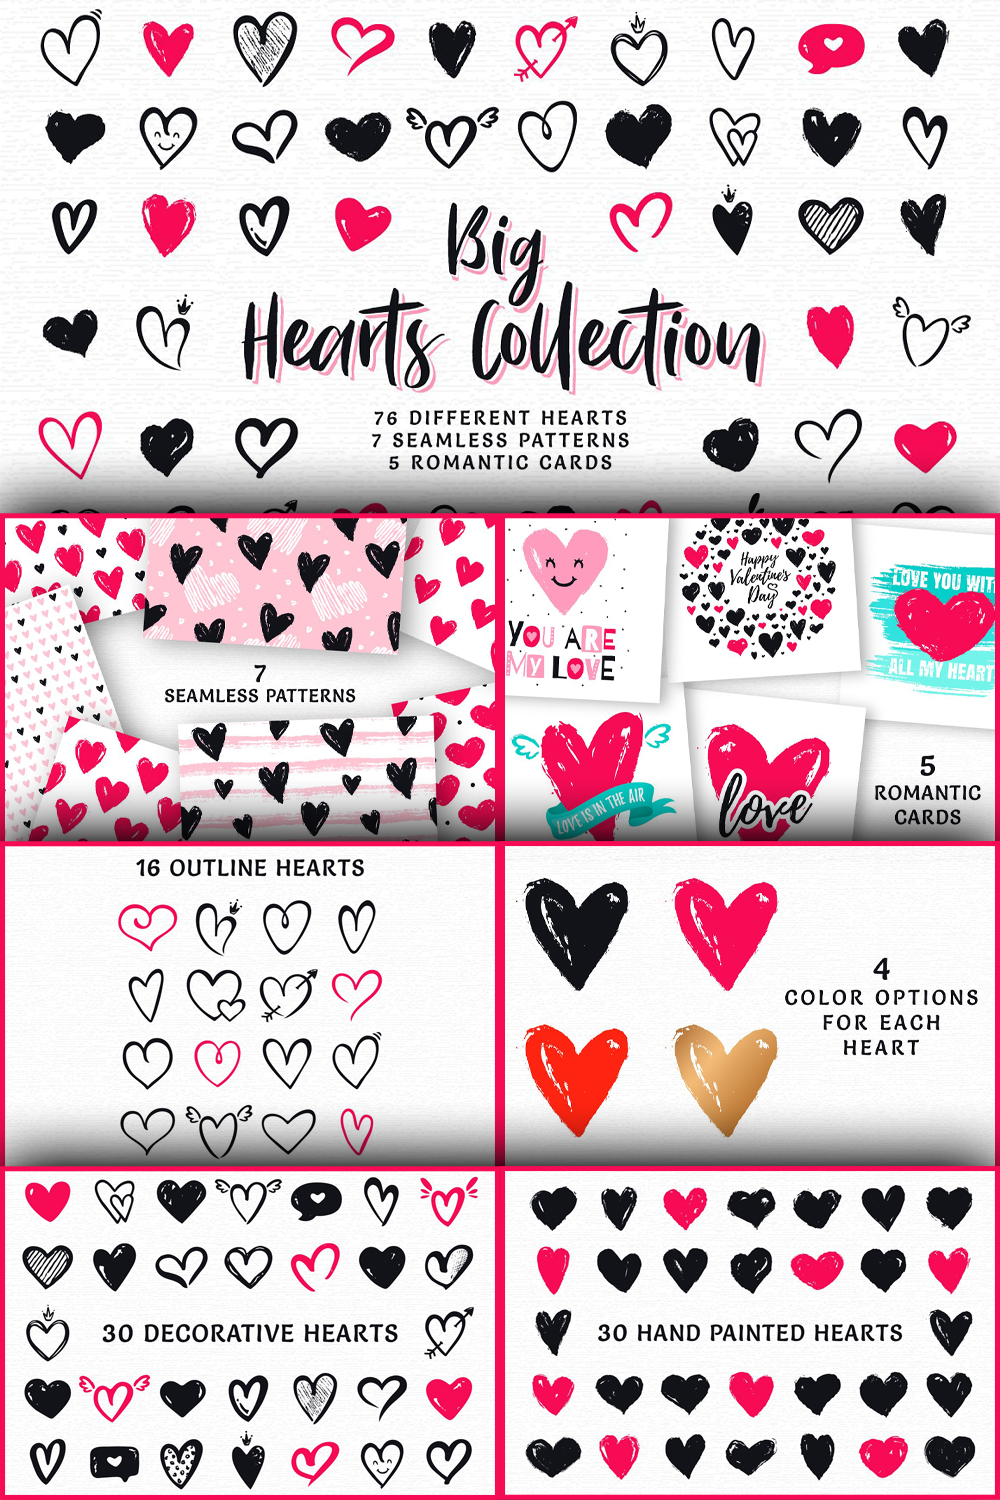 Hand drawn hearts big collection of pinterest.